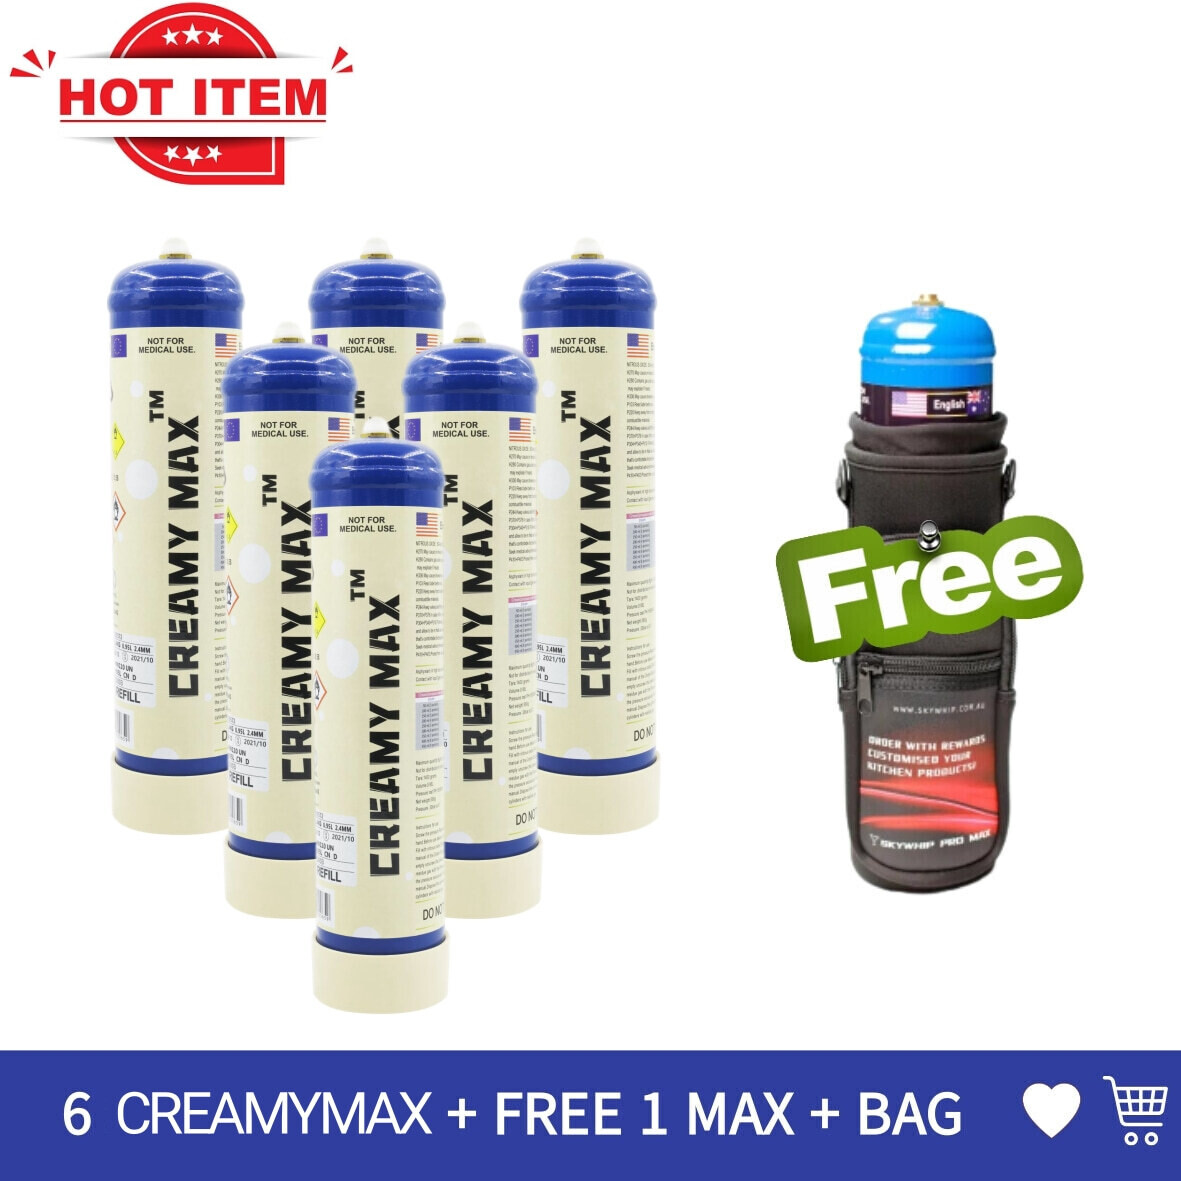 Cream Chargers: 6x 580g Cylinder Creamy Max + Free Tank & Bag